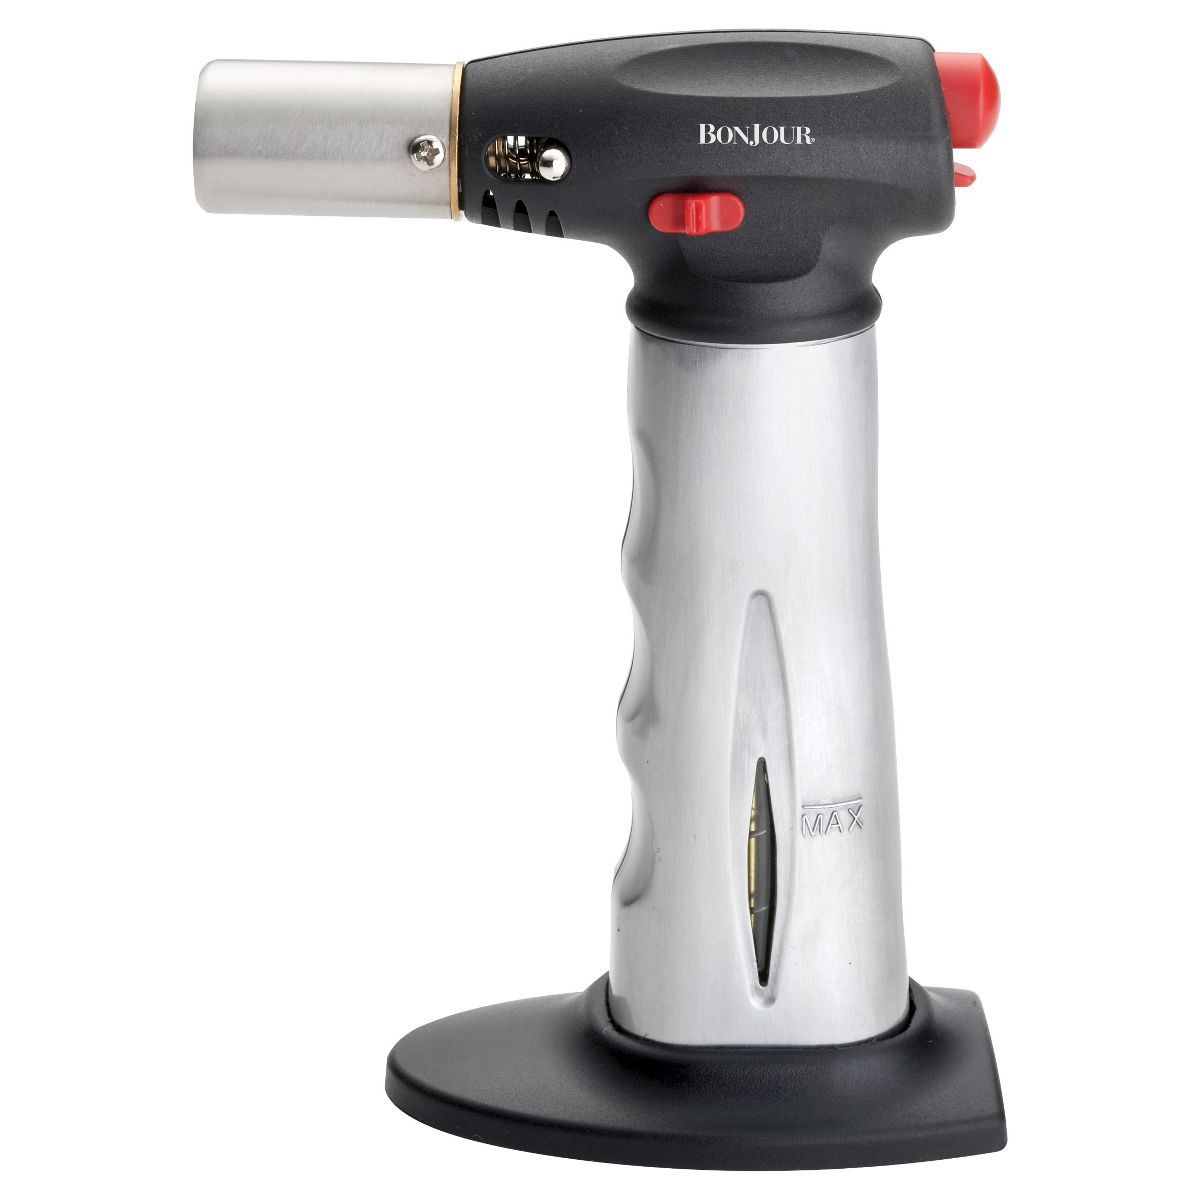 BonJour Brushed Aluminum Chef's Torch with Fuel Gauge | Target